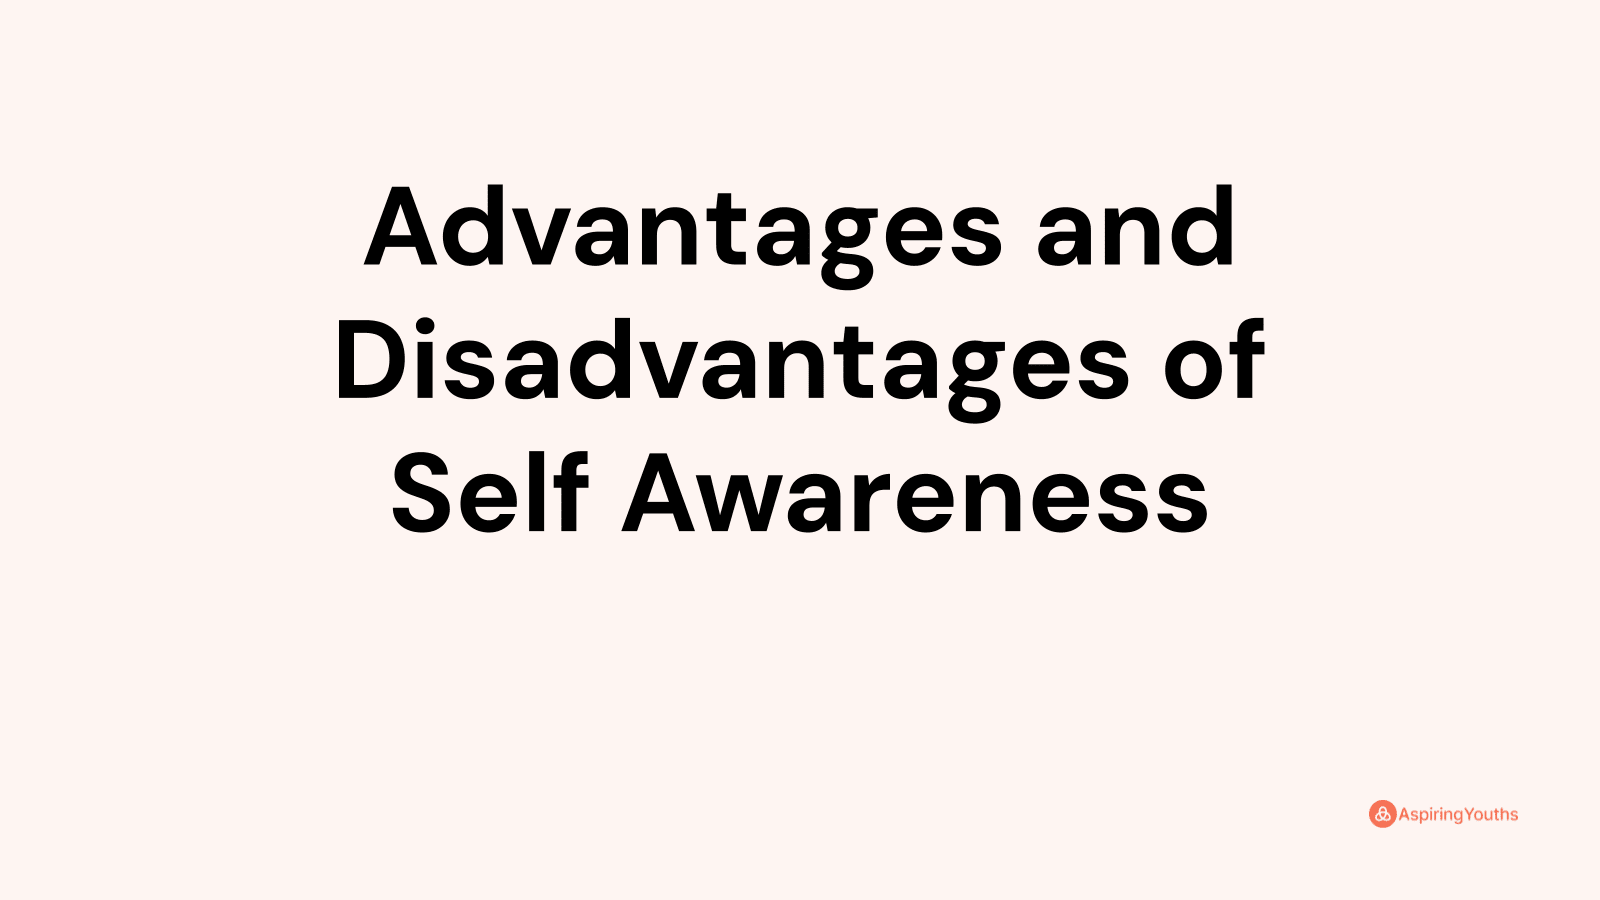 Advantages and disadvantages of Self Awareness